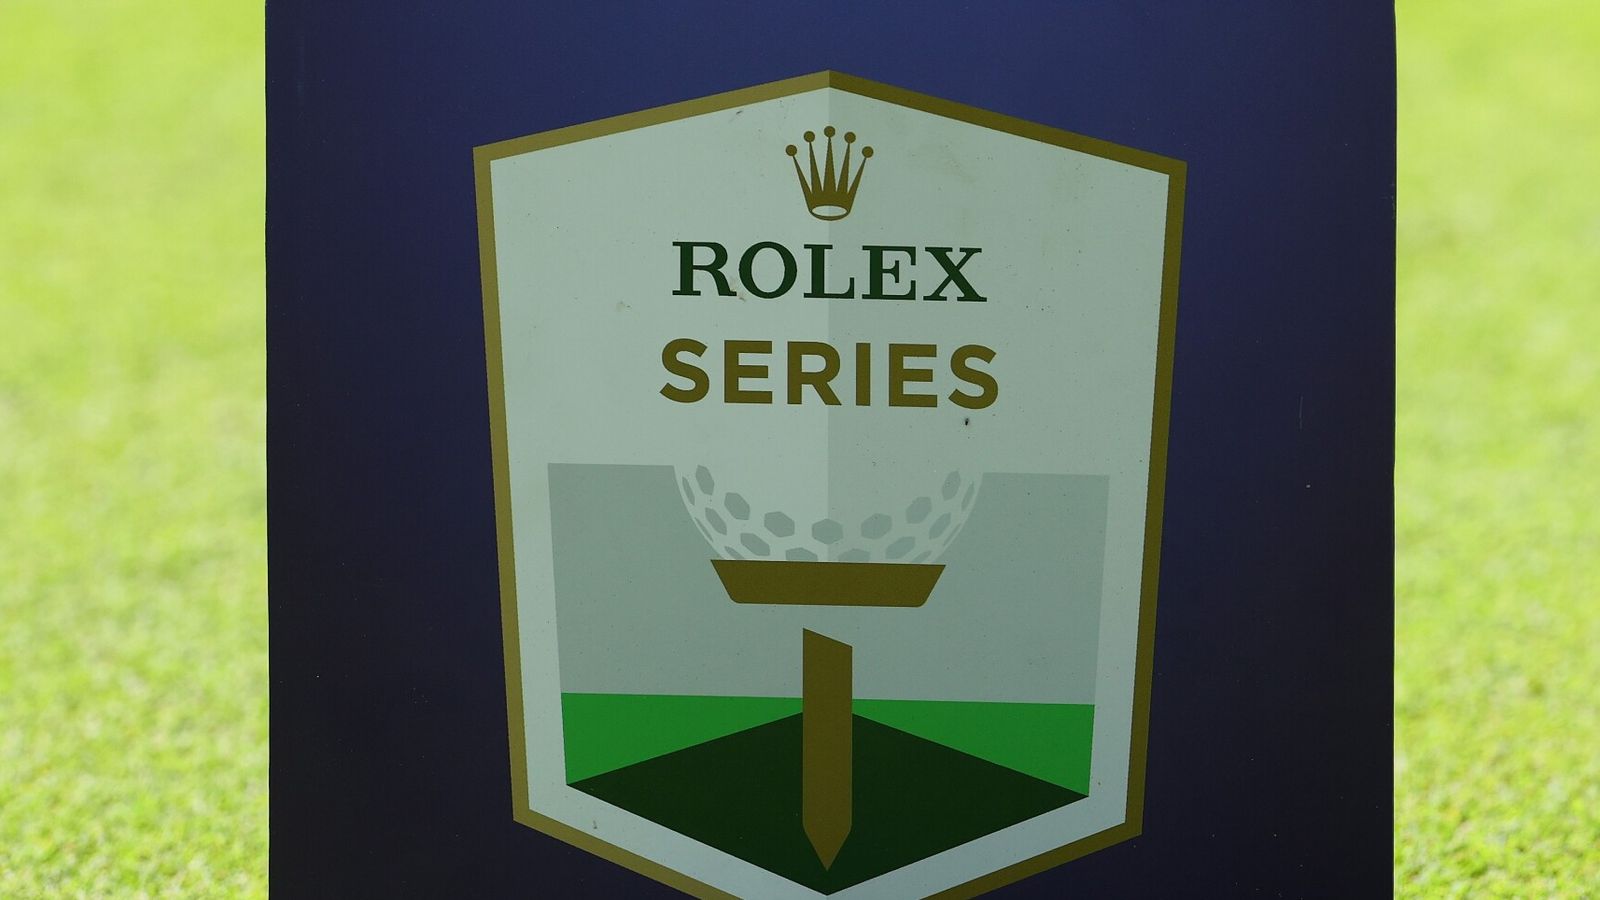 DP World Tour: All Rolex Series events in 2023 to be carbon neutral as part of ‘net zero’ target